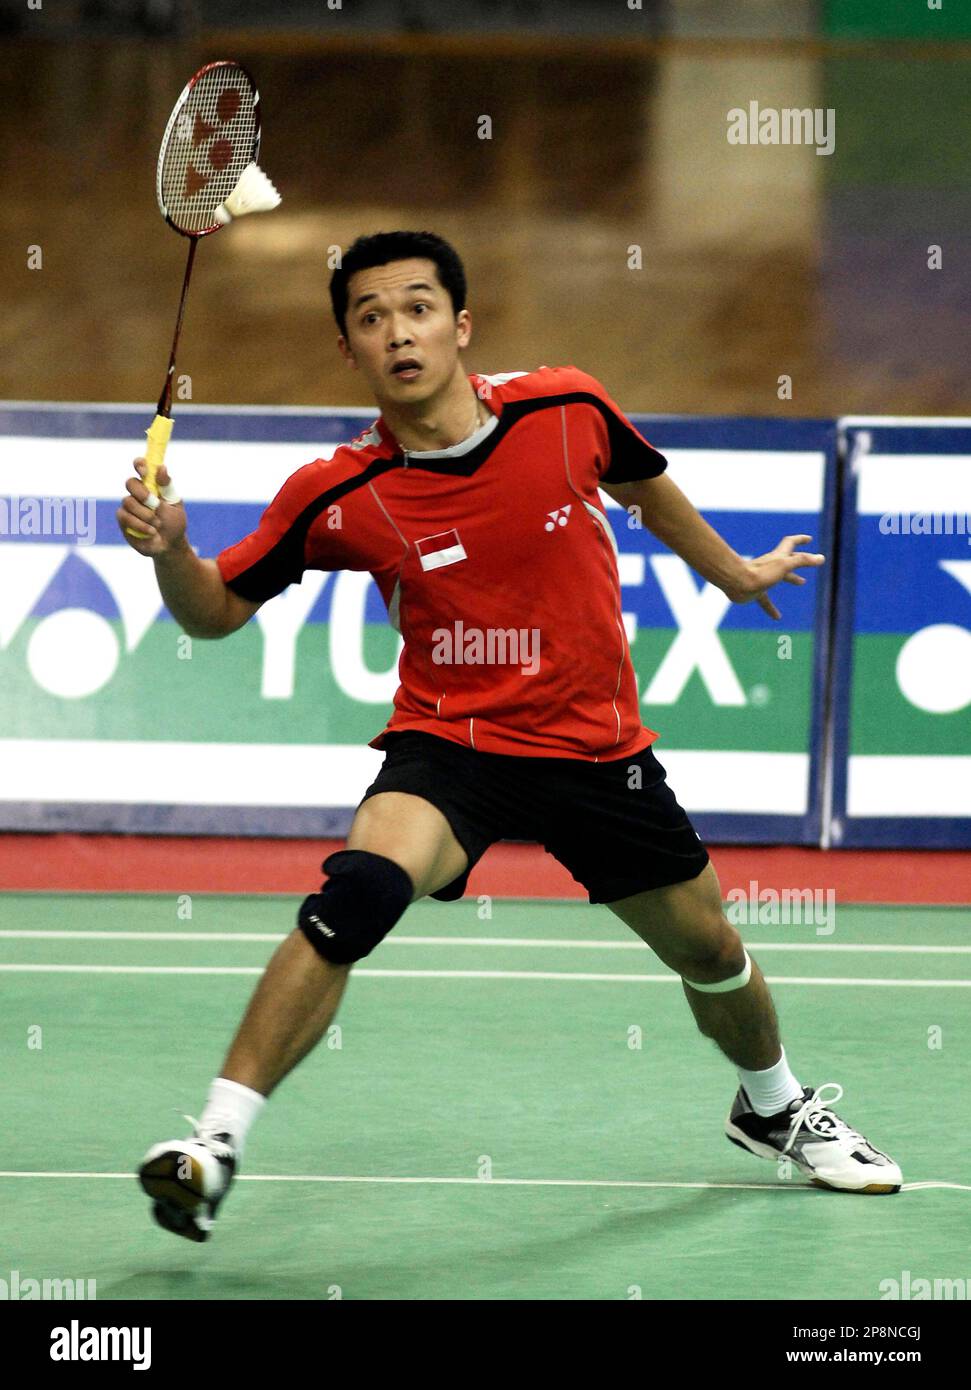 Indonesian badminton player Taufik Hidayat plays a shot against fellow Indonesian Tommy Sugiarto in the men's single semifinal of the Yonex Sunrise India Open 2009 in Hyderabad, India, Saturday, March 28, 2009. Former world and Olympic champion Hidayat won the match 21-13, 21-11. (AP Photo/Mahesh Kumar A.) Stock Photo